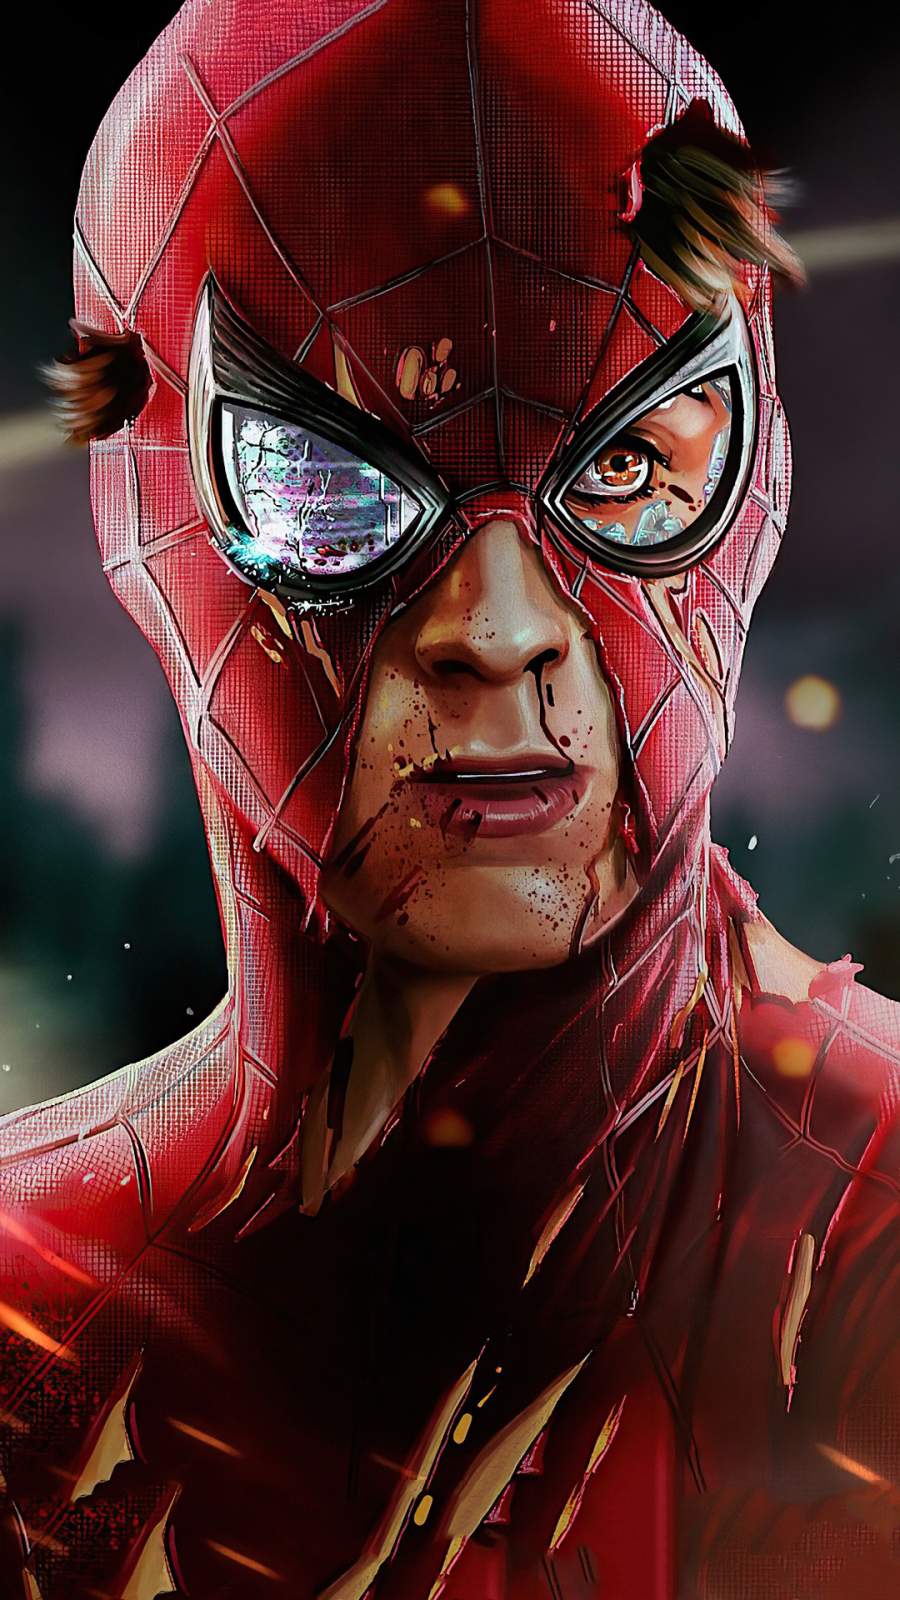 Damaged Spider Man - IPhone Wallpapers : iPhone Wallpapers